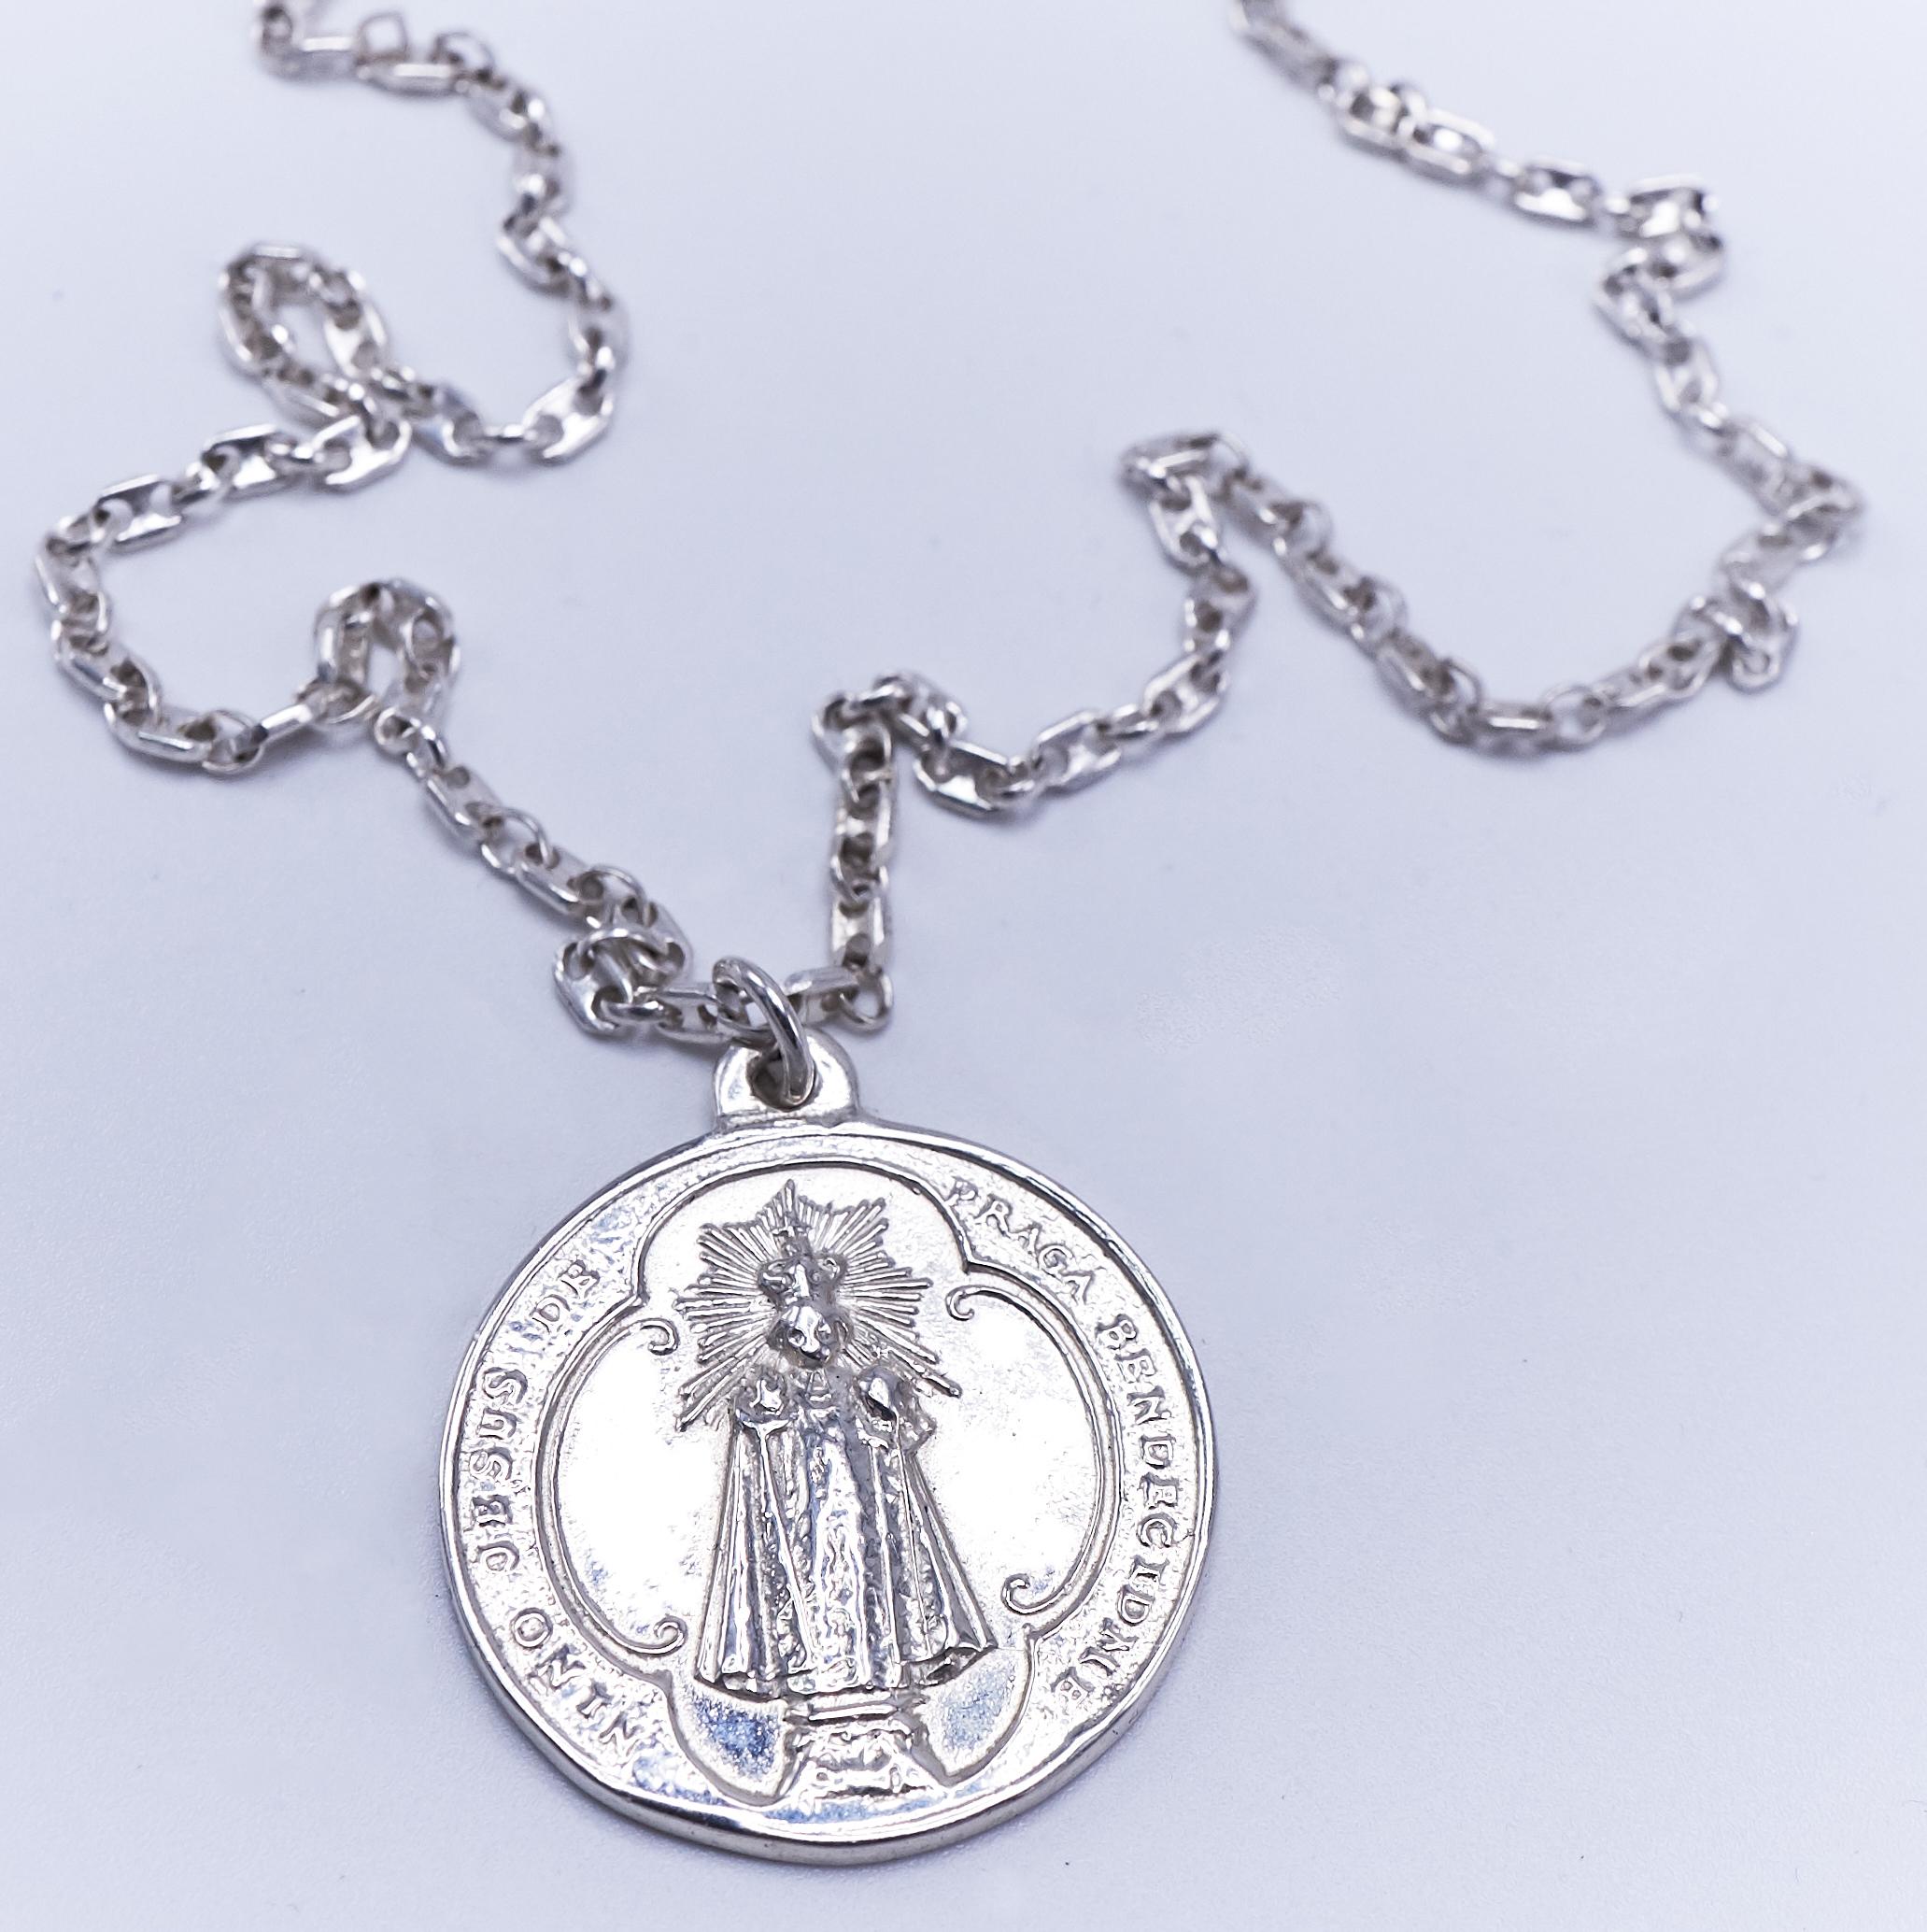 Contemporary Medal Chain Necklace Miraculous Virgin Mary Black Diamond Silver J Dauphin For Sale